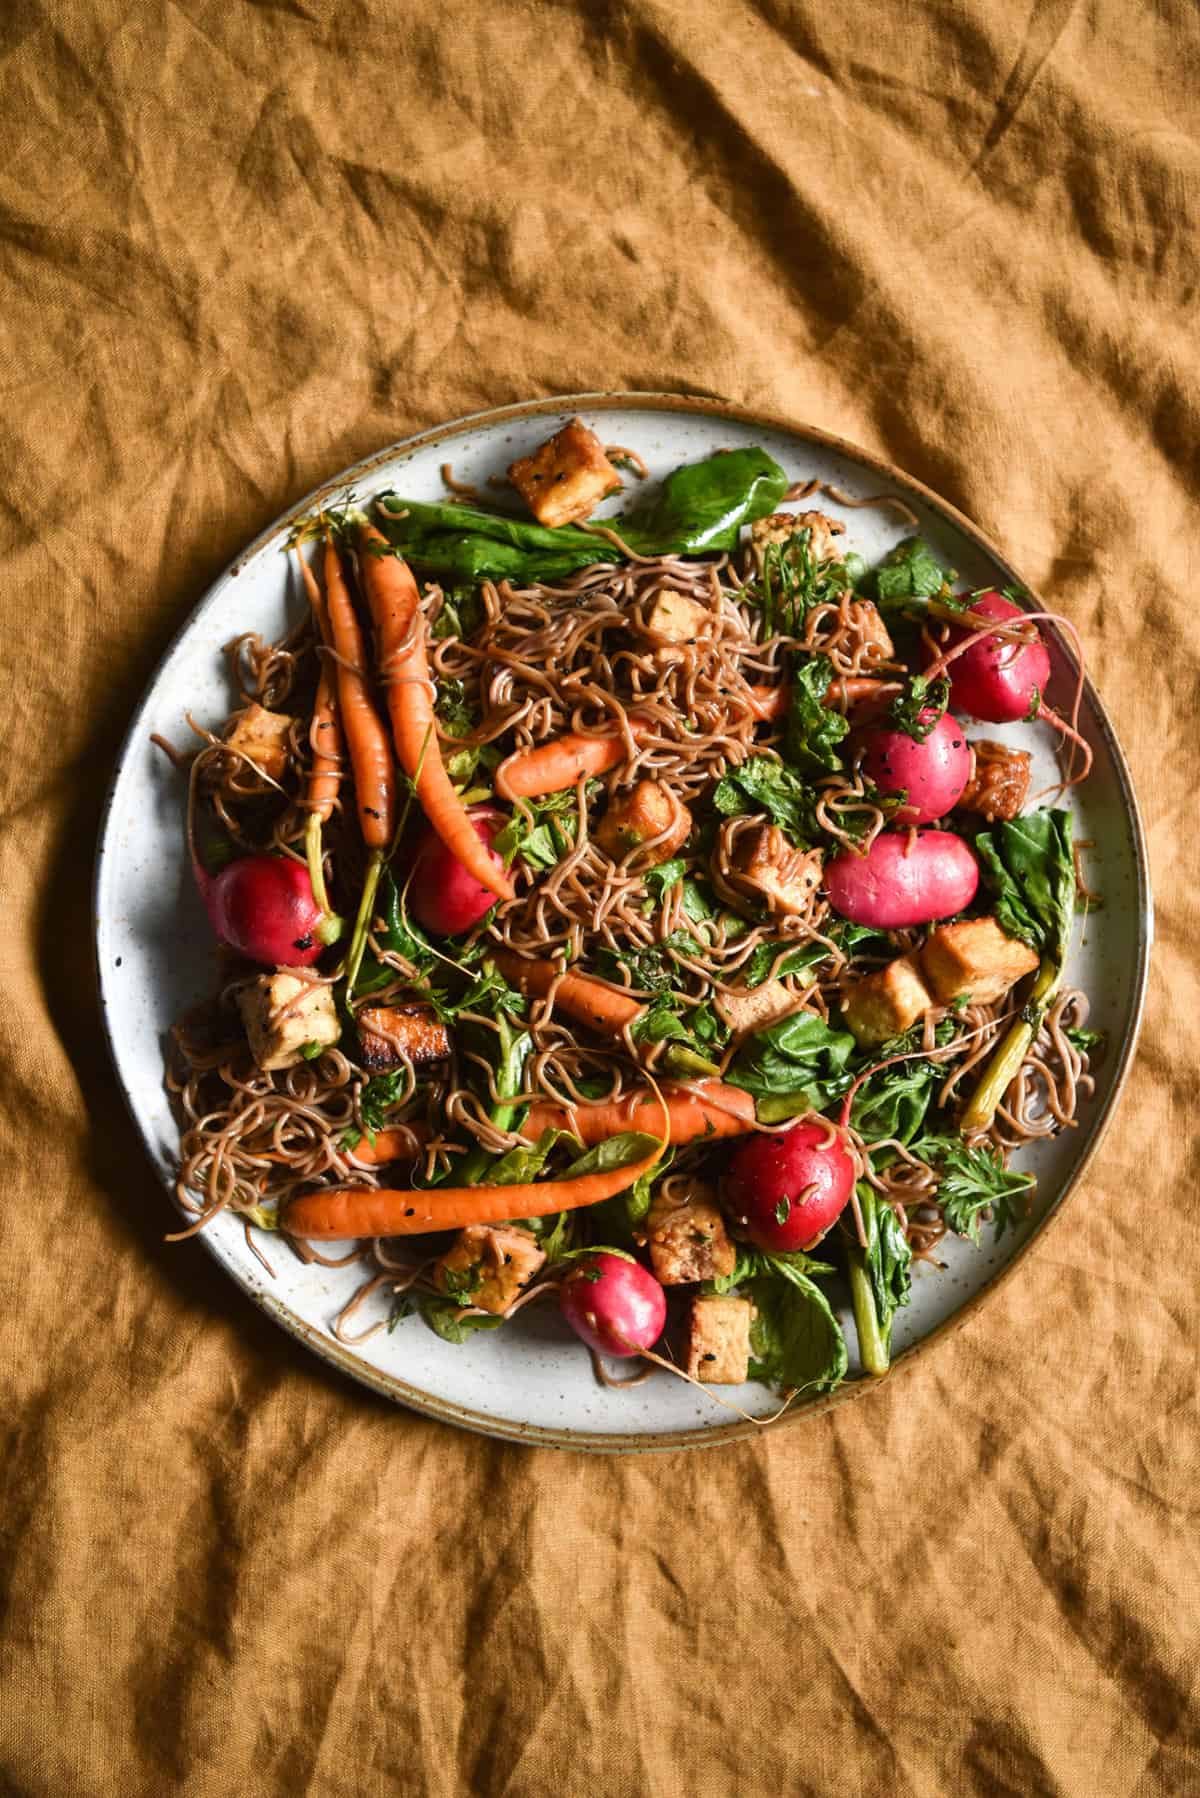 A plate of sweet and sticky buckwheat noodles with carrots, radishes, tofu and Asian greens. The white ceramic plate sits on a turmeric coloured linen tablecloth.